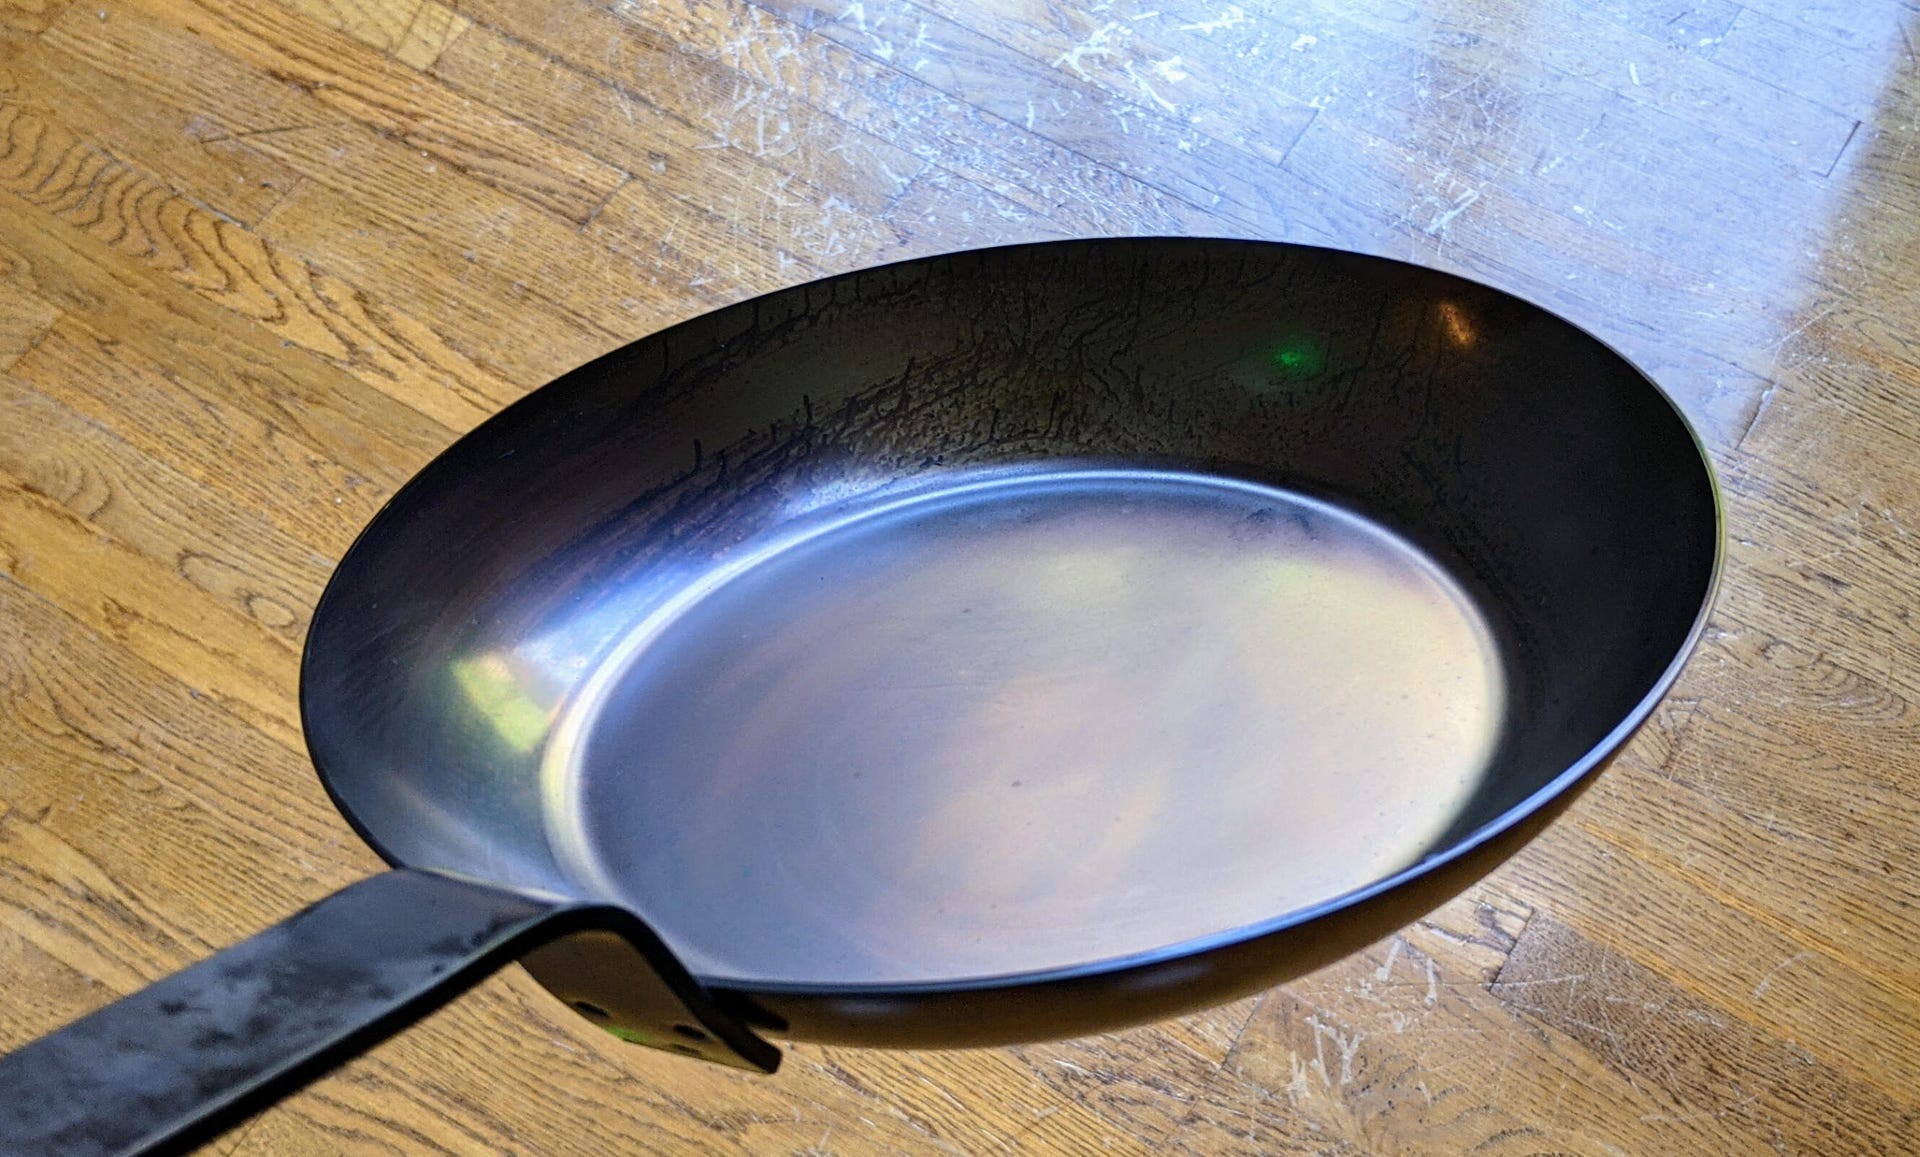 How to season a carbon steel skillet like a pro - CNET